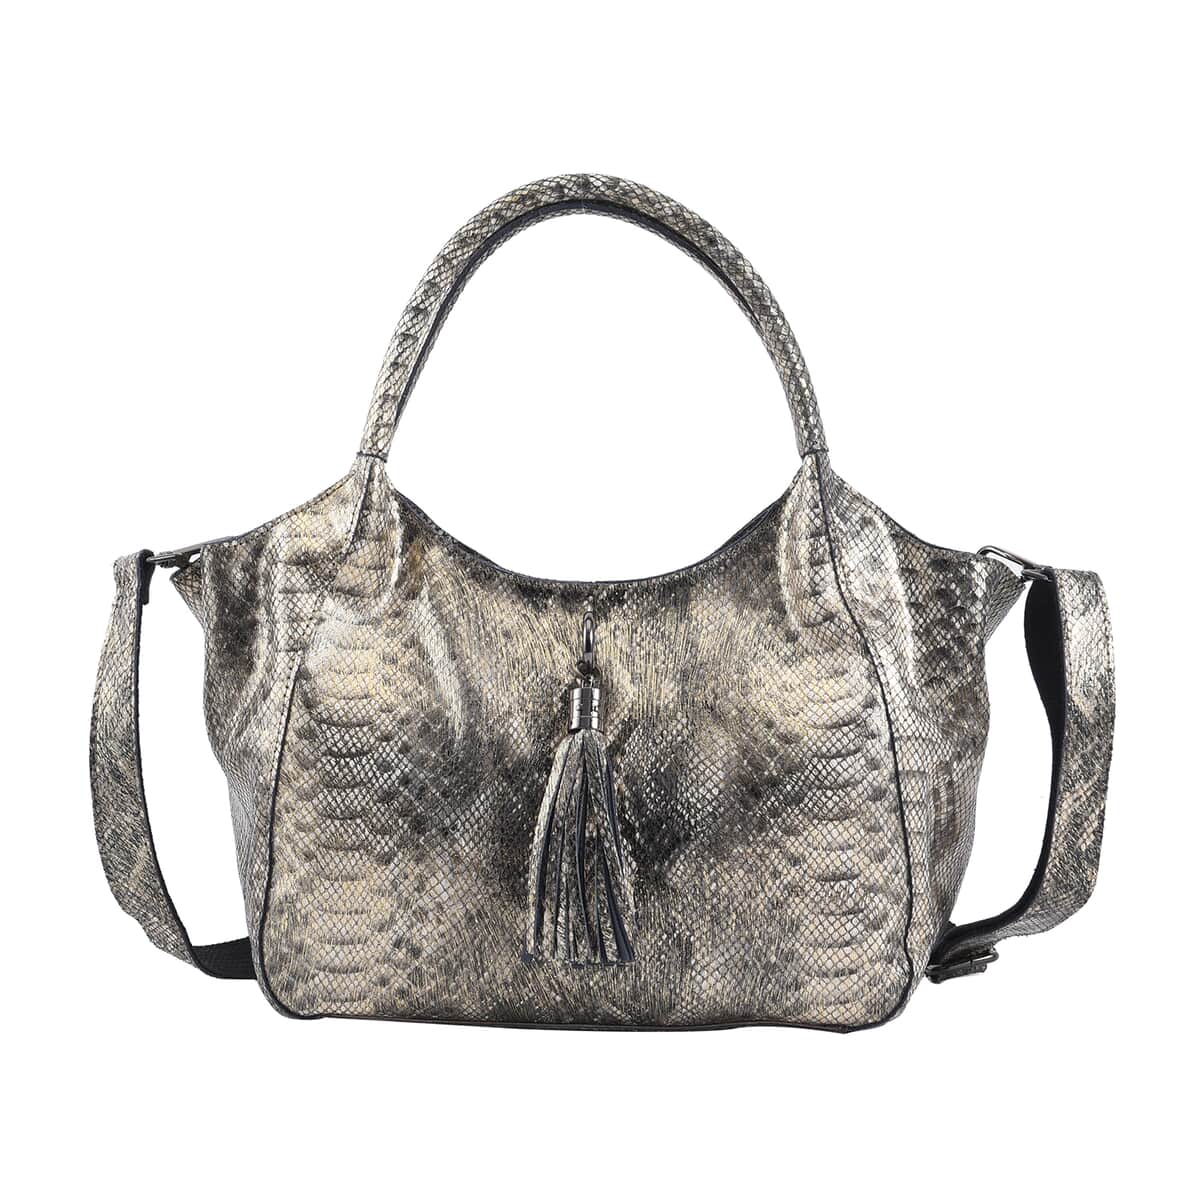 Gold and Black Snake Print Genuine Leather Hobo Bag with Detachable Shoulder Strap and Handle Drop image number 0